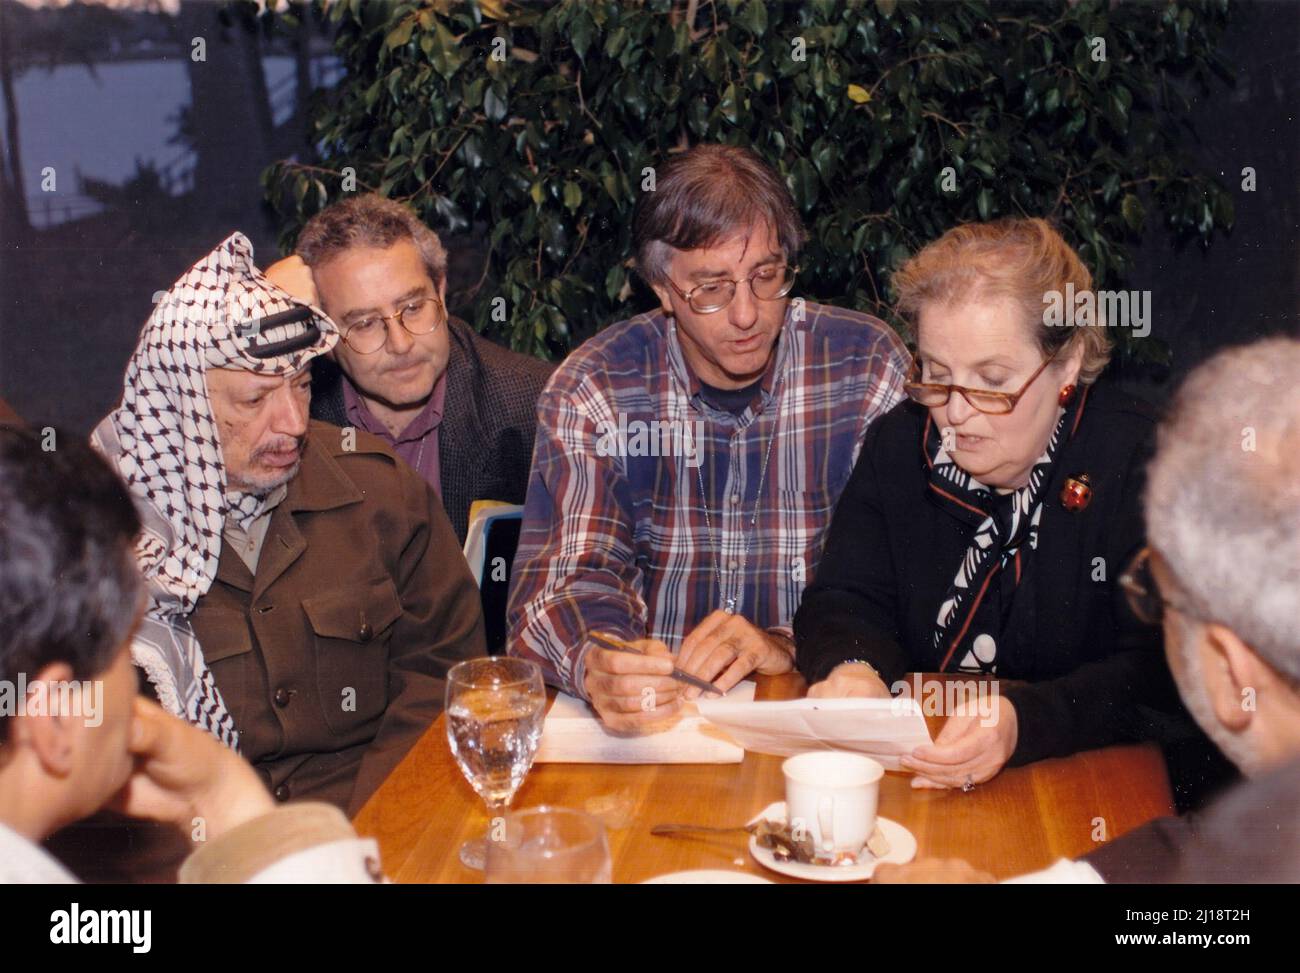 United States Secretary of State Madeleine Albright examines a document with Palestinian leader Yasser Arafat at the Wye River Plantation where peace talks continue between Israeli Prime Minister Benjamin Netanyahu and Arafat at the secluded Maryland site, Thursday, October 22, 1998. From left to right: Chairman Arafat, Gamal Helal, The Interpreter, Ambassador Dennis Ross, and Secretary Albright.Mandatory Credit: White House via CNP/Sipa USA Credit: Sipa USA/Alamy Live News Stock Photo